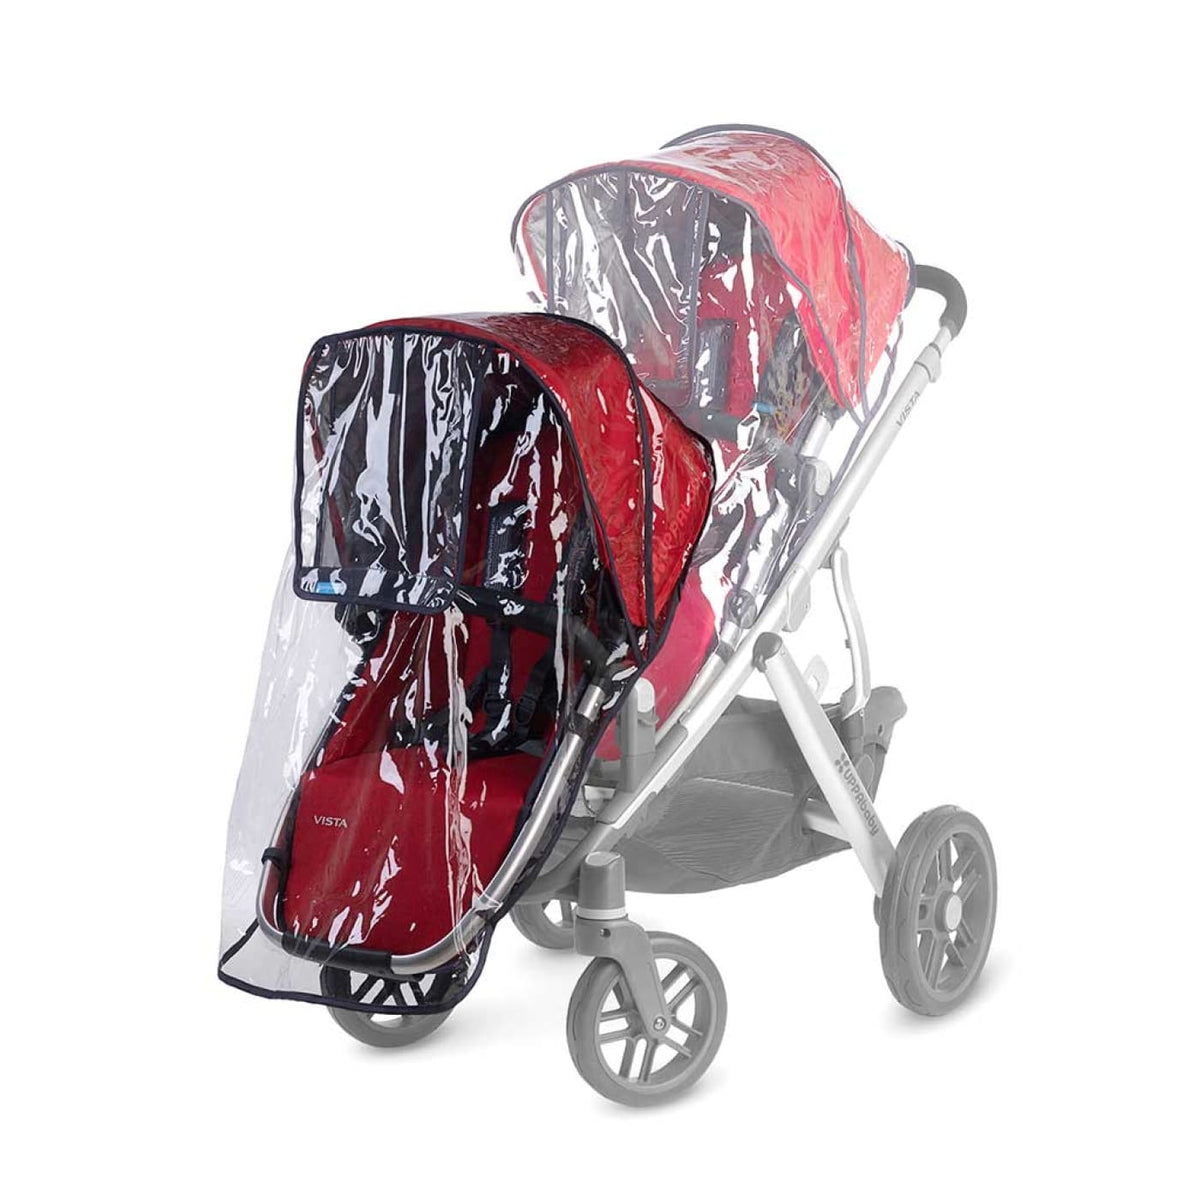 UPPAbaby Vista Rumble Seat Rainshield - PRAMS &amp; STROLLERS - SUN COVERS/WEATHER SHIELDS